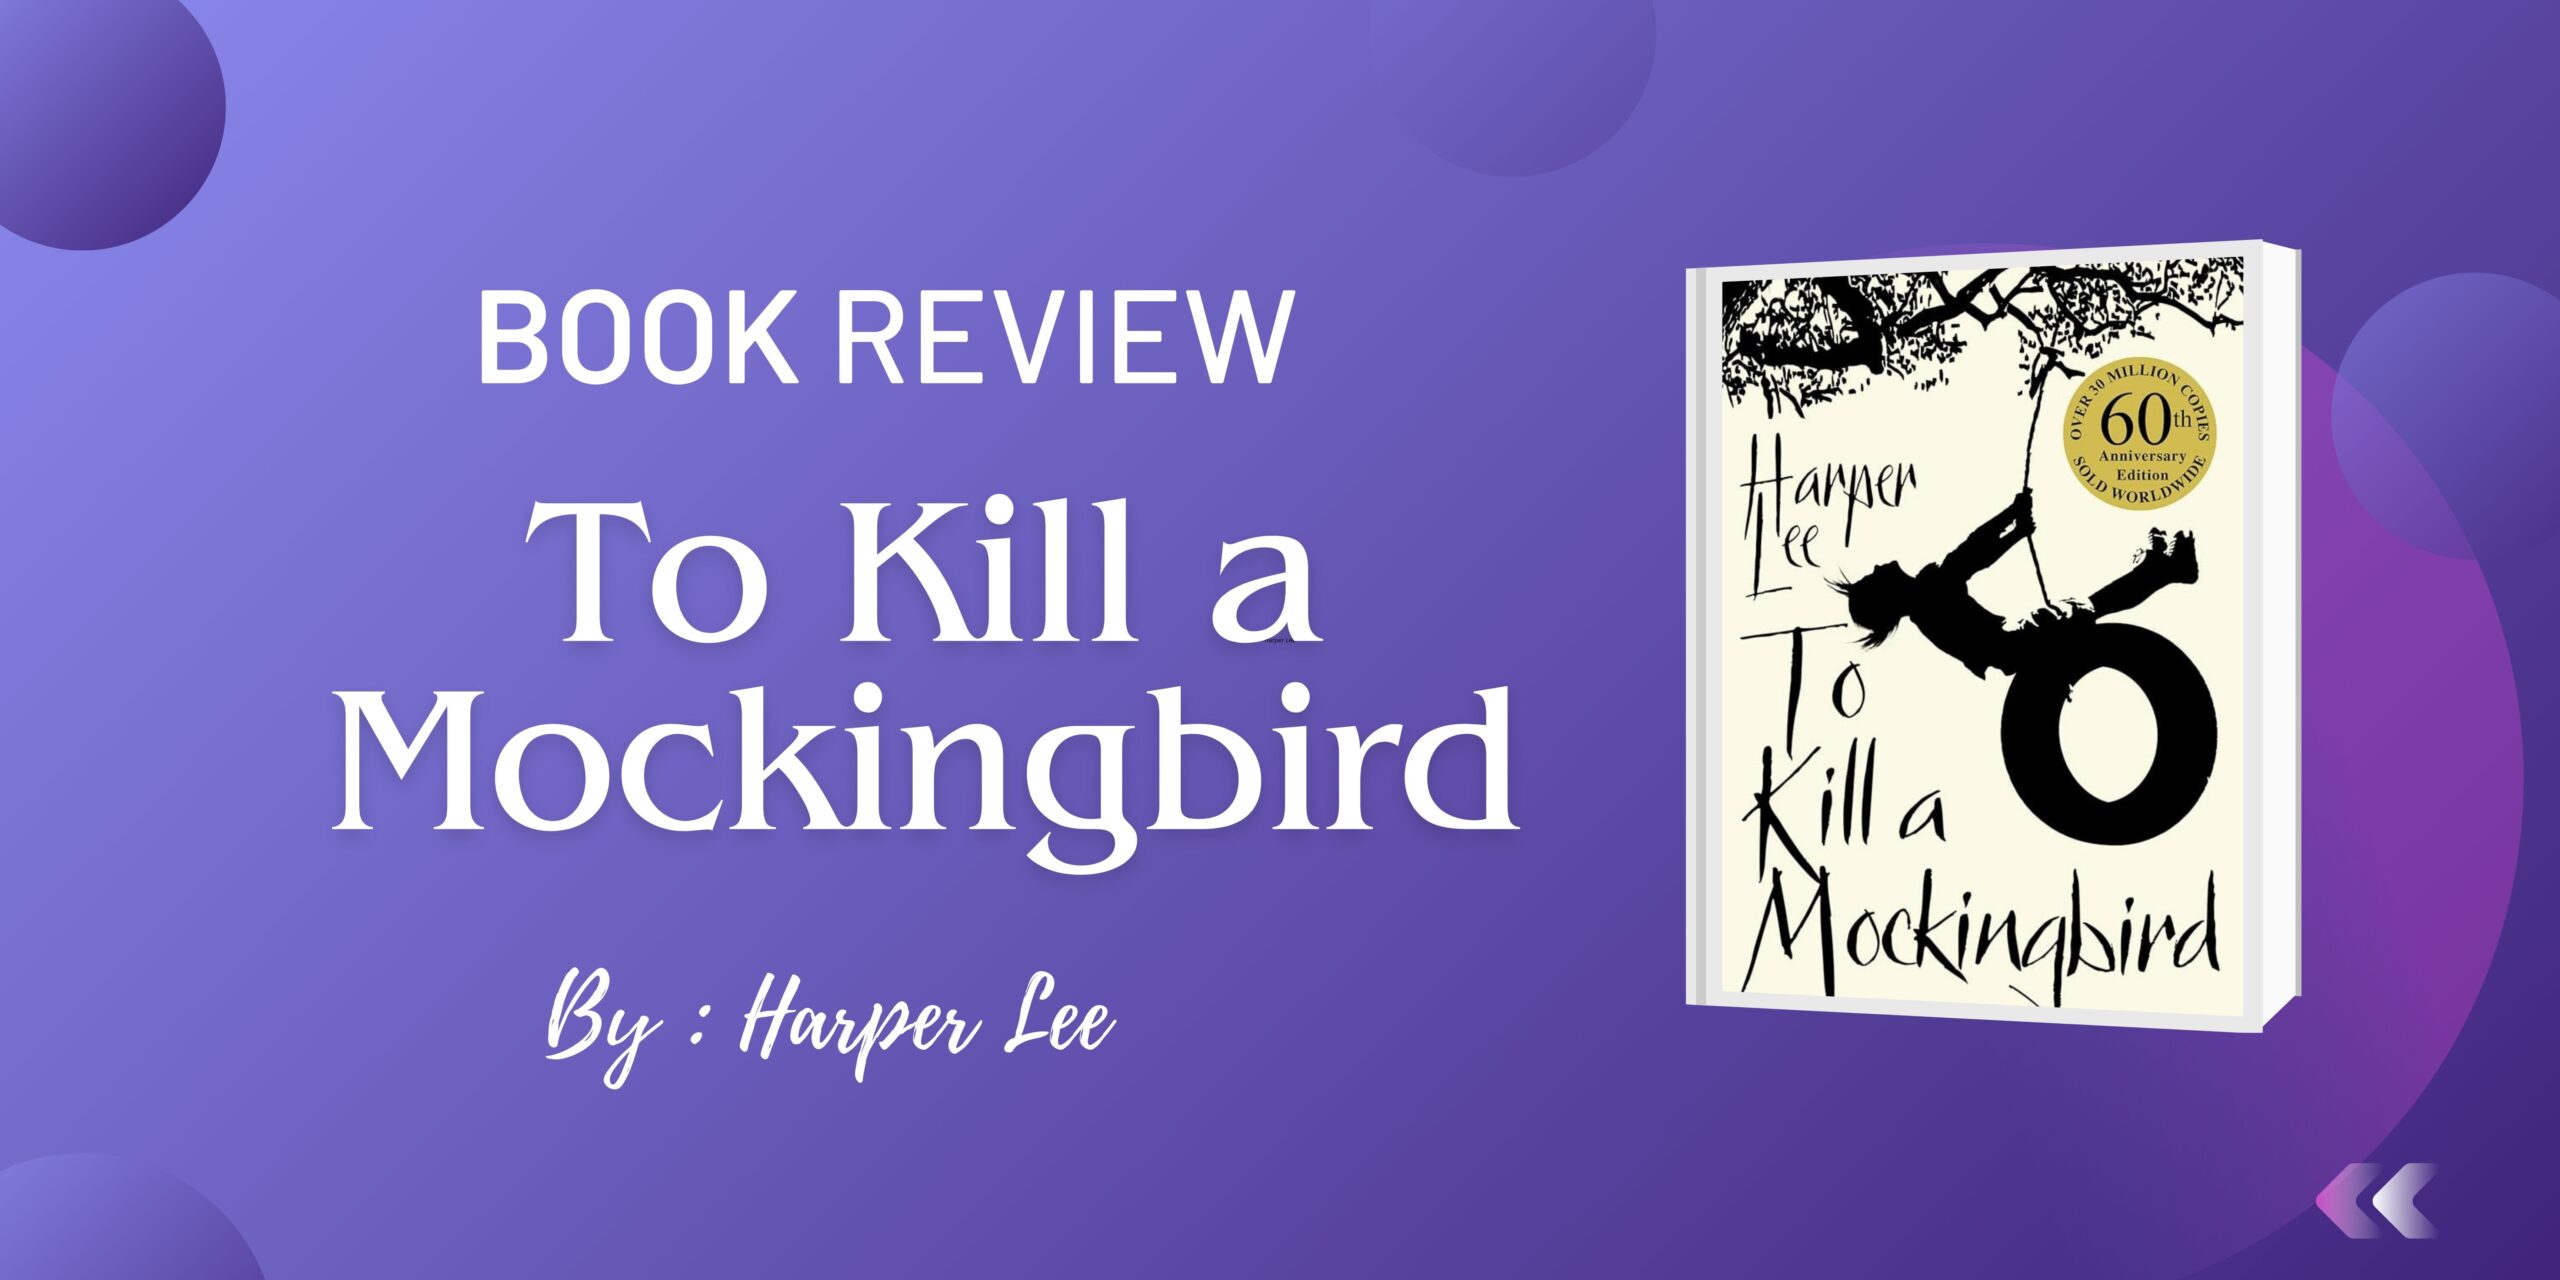 Book Review: To Kill a Mockingbird Novel by Harper Lee